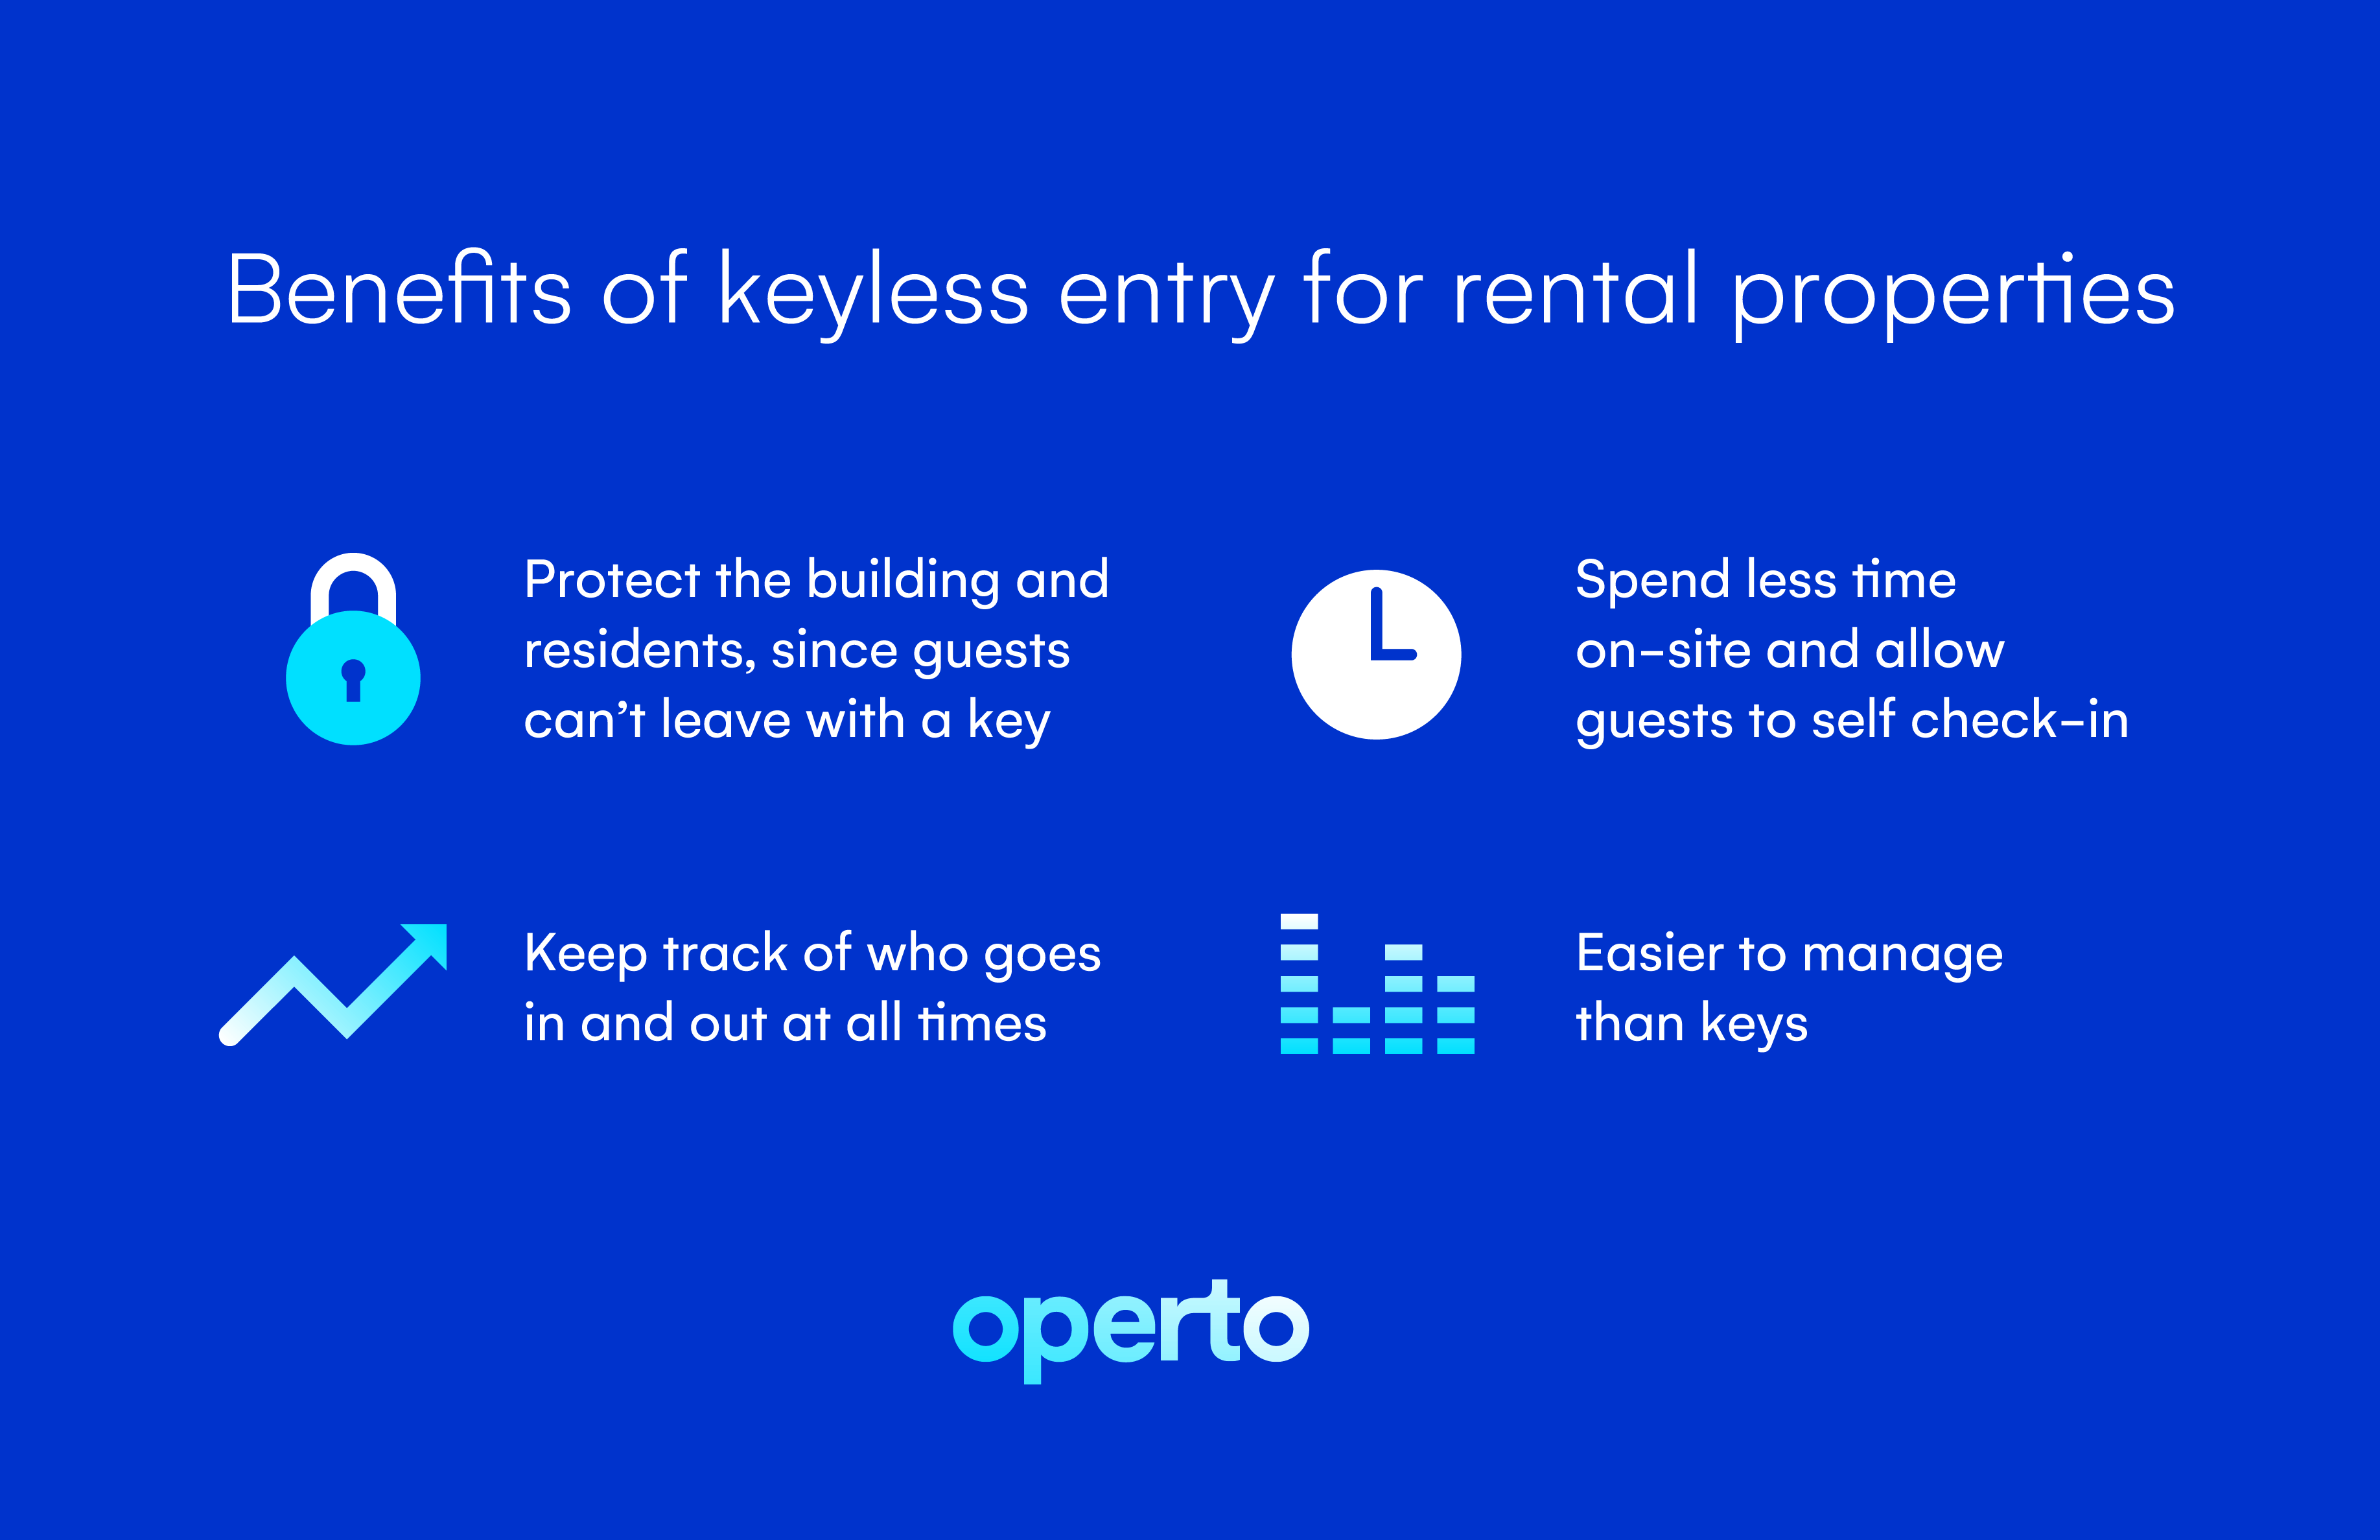 List of benefits of keyless entry for rental properties